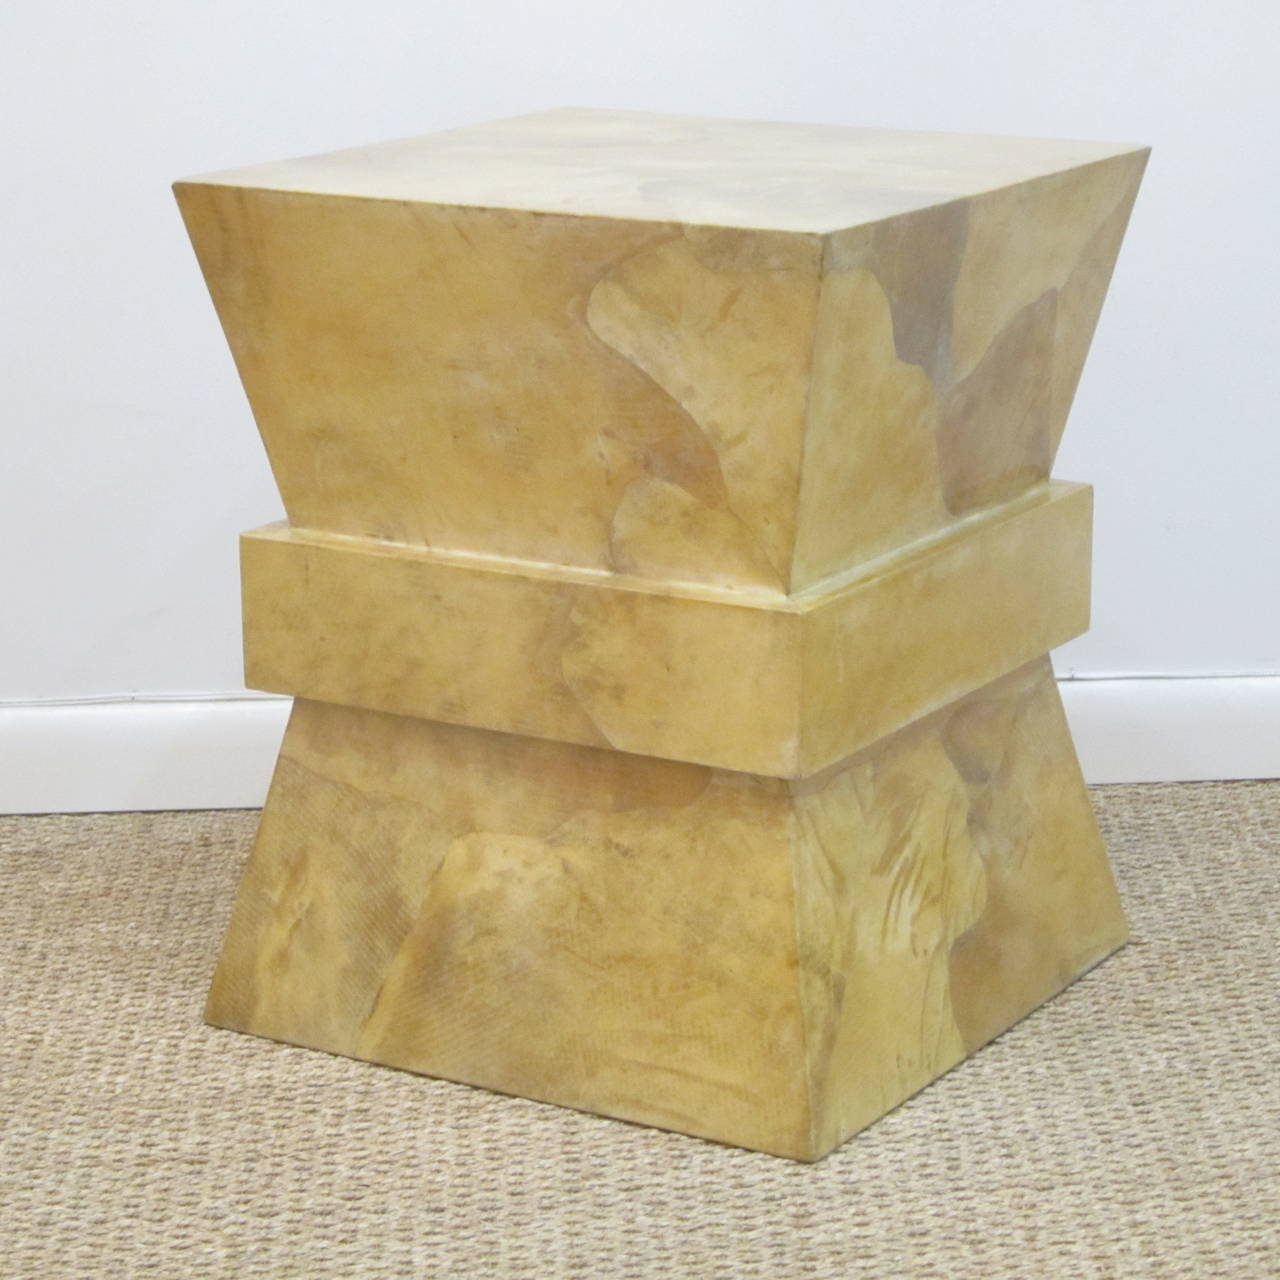 Side table covered in goatskin panels and clear coat lacquer. Great for a reading lamp as well as a pedestal to display a sculpture.